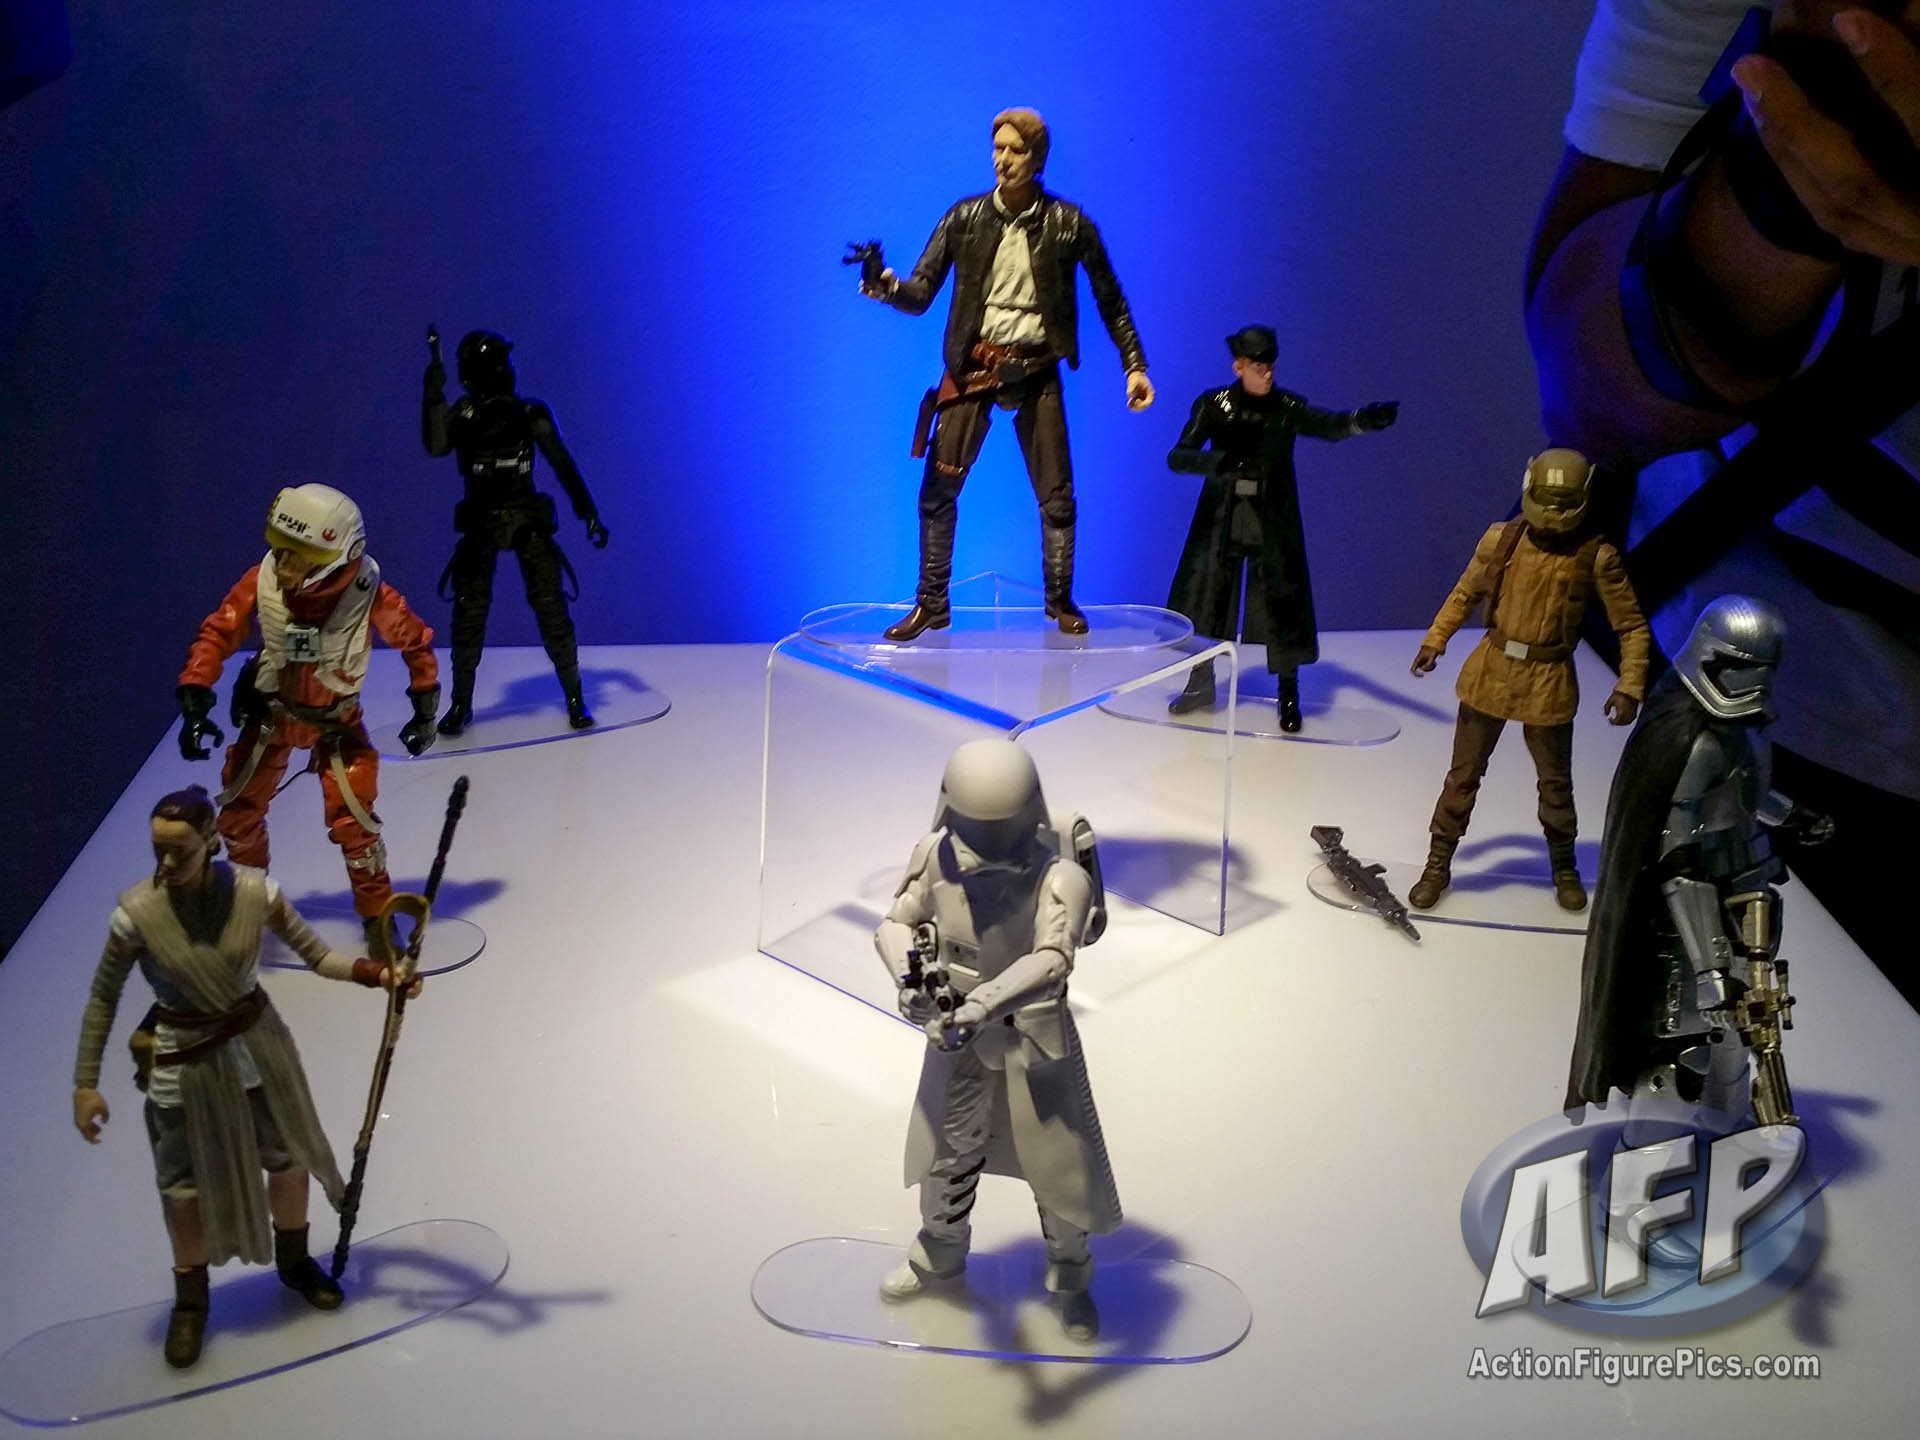 See Hasbro's 'Star Wars' Collectibles from New York Comic Con 2019